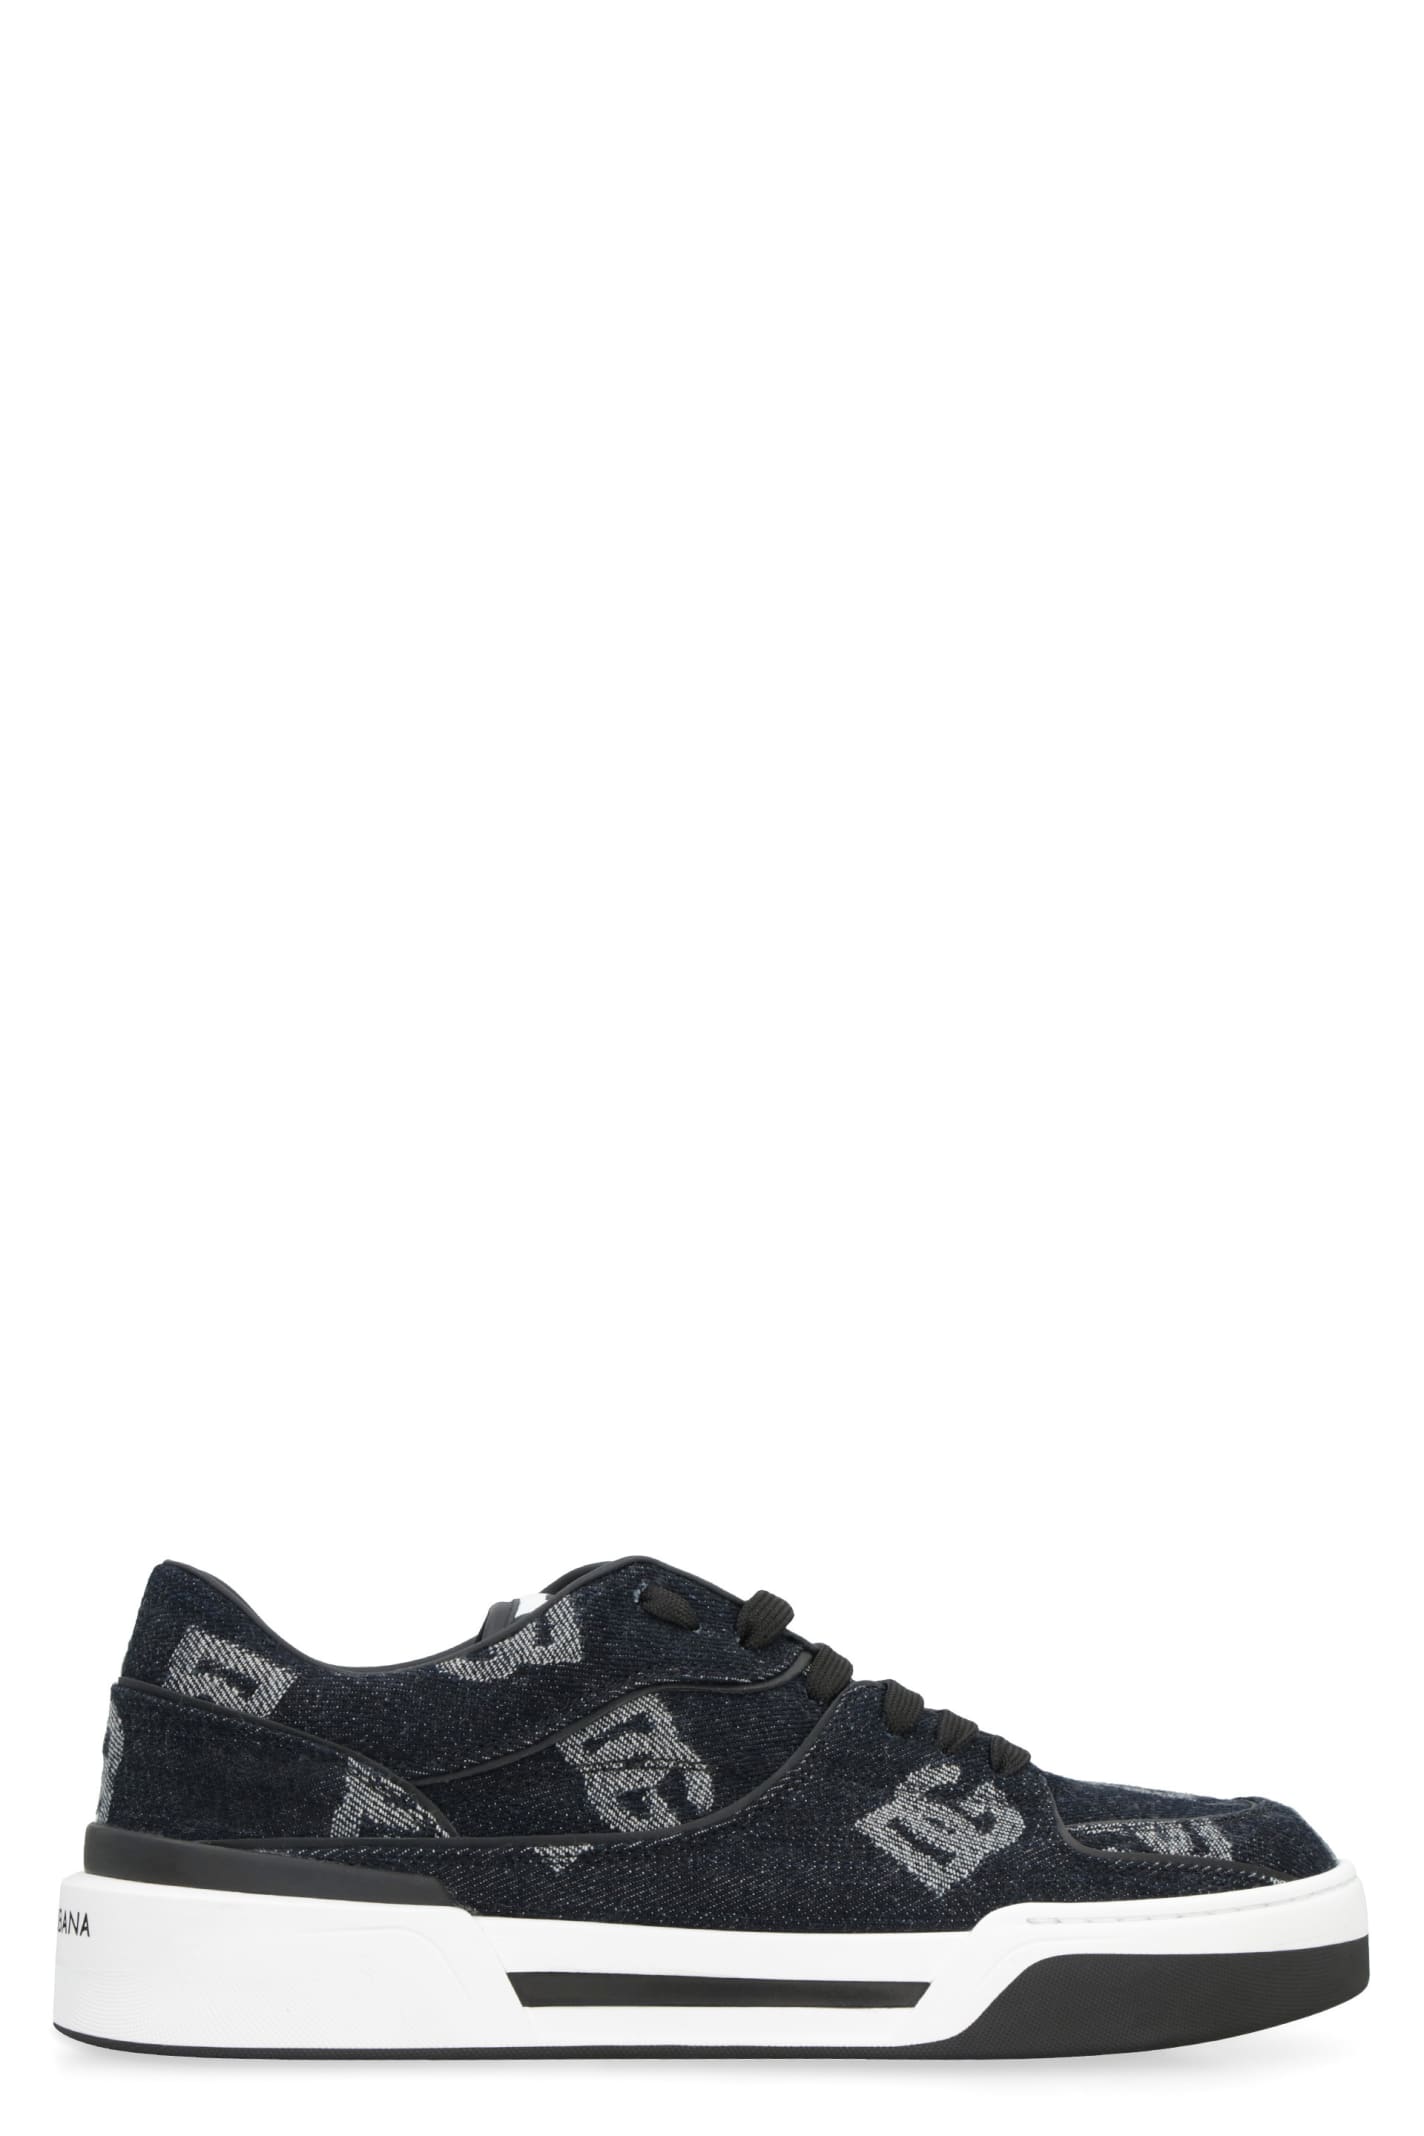 Dolce & Gabbana New Roma Panelled Sneakers - Black